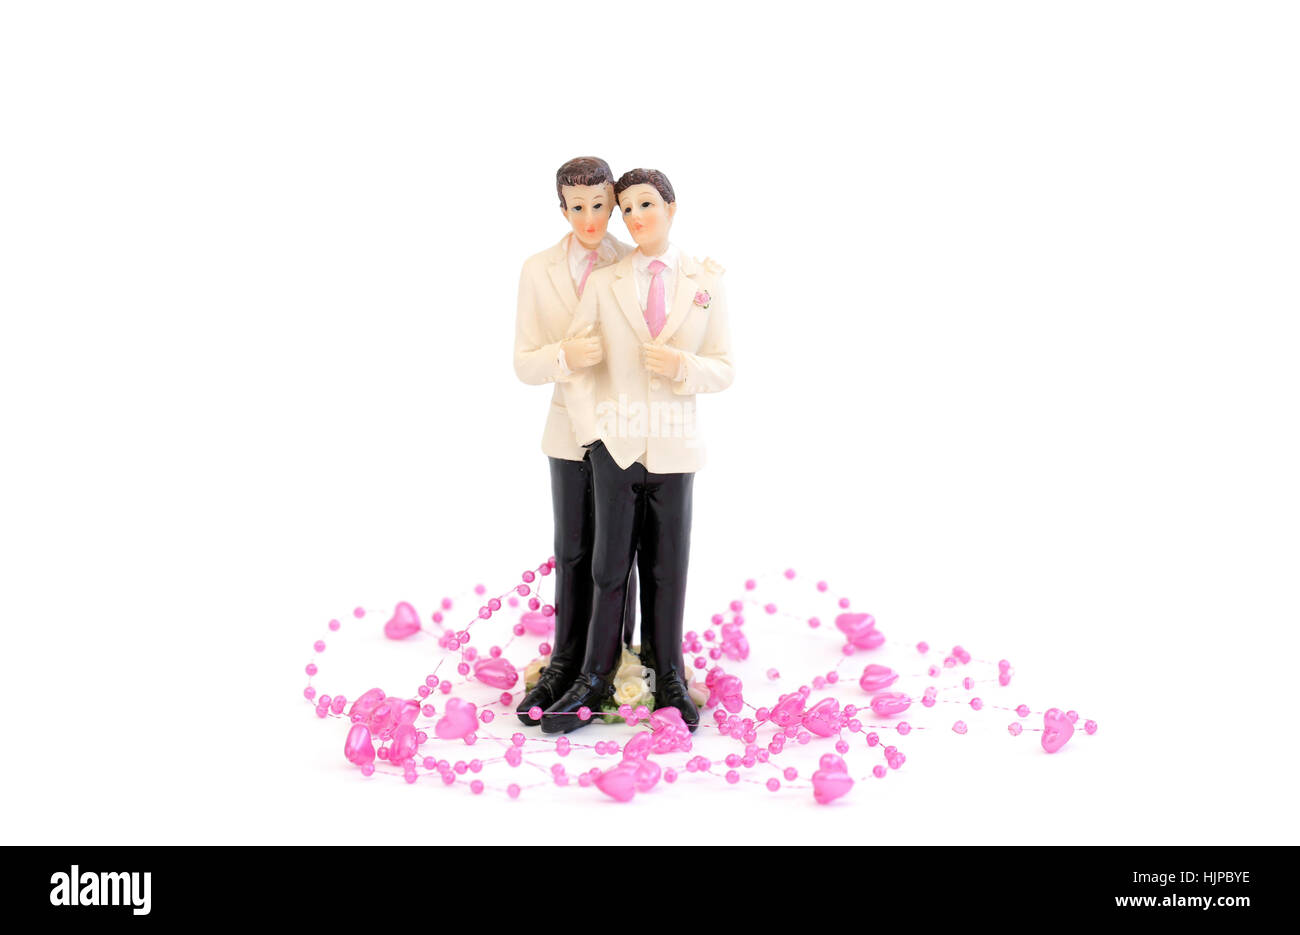 A homosexual couple with little pink hearts against a white background Stock Photo